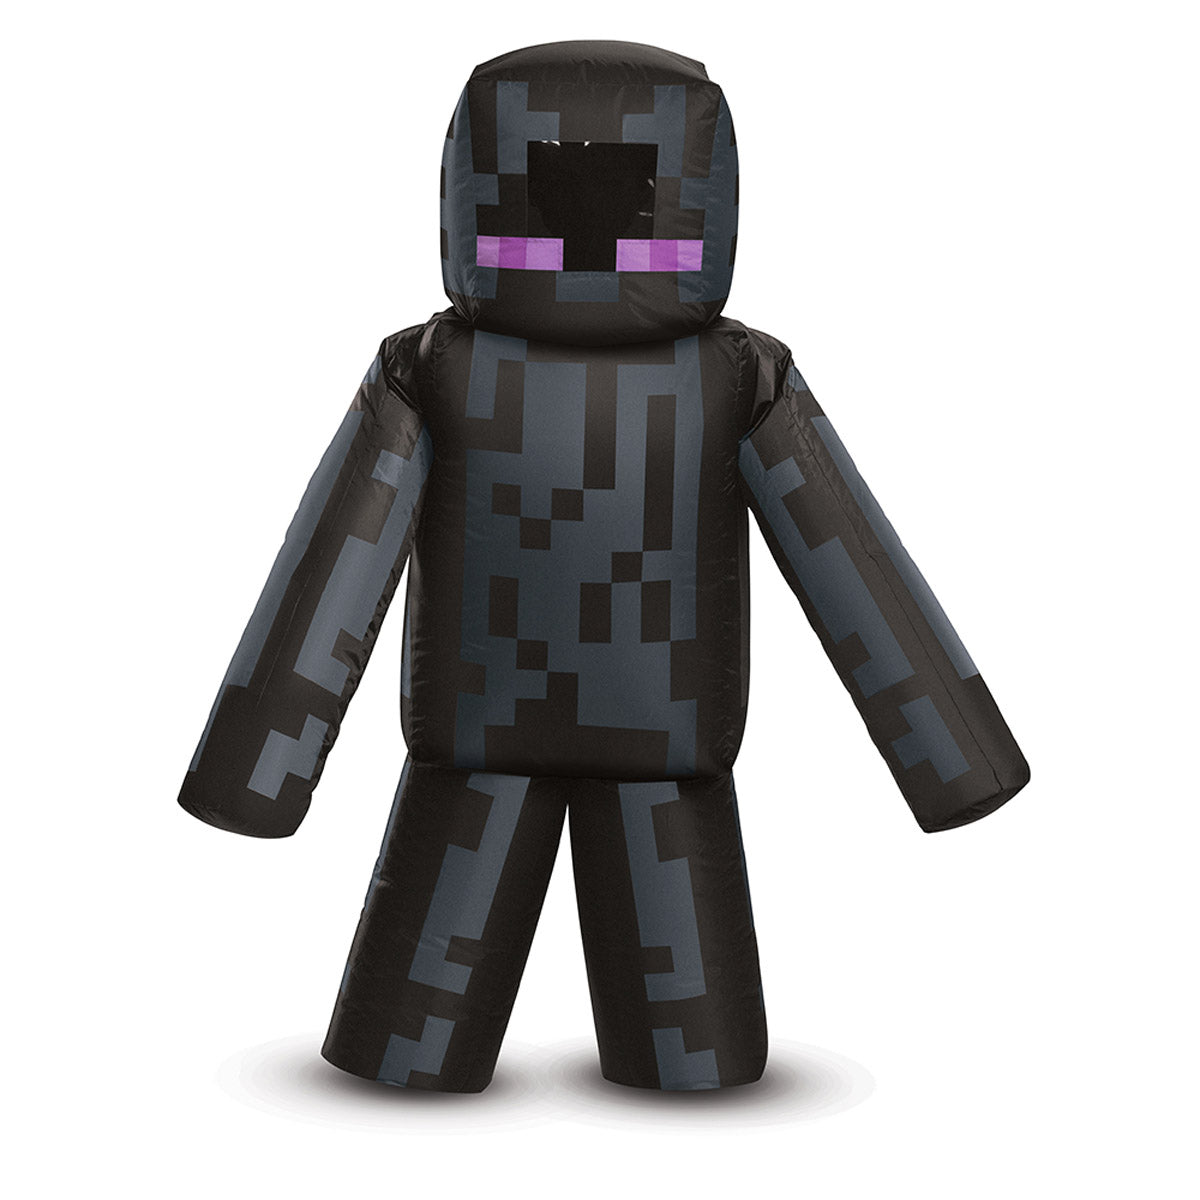 Enderman Inflatable Child Disguise 105119